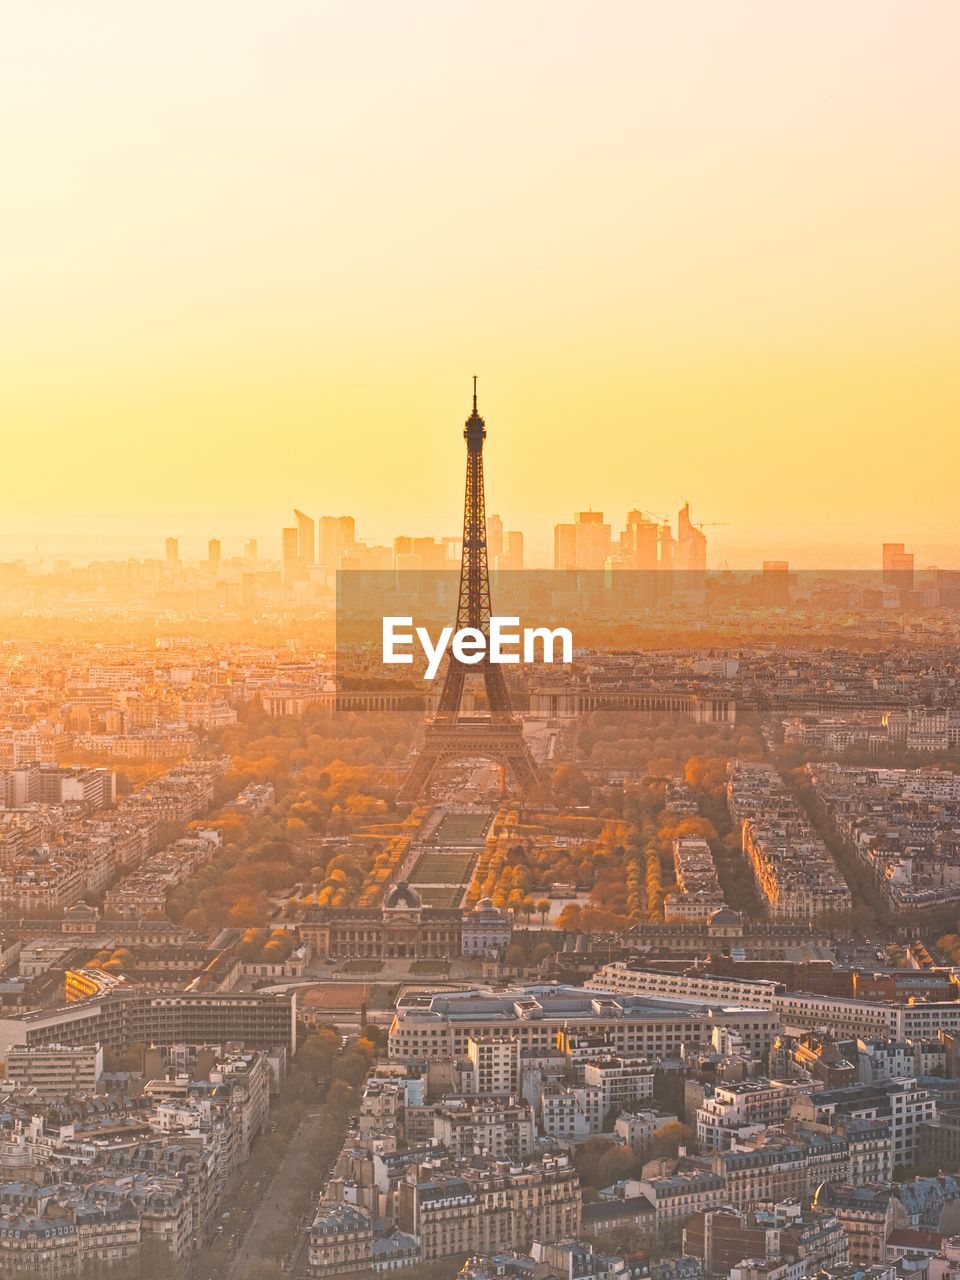 Eiffel tower amidst buildings in city during sunrise